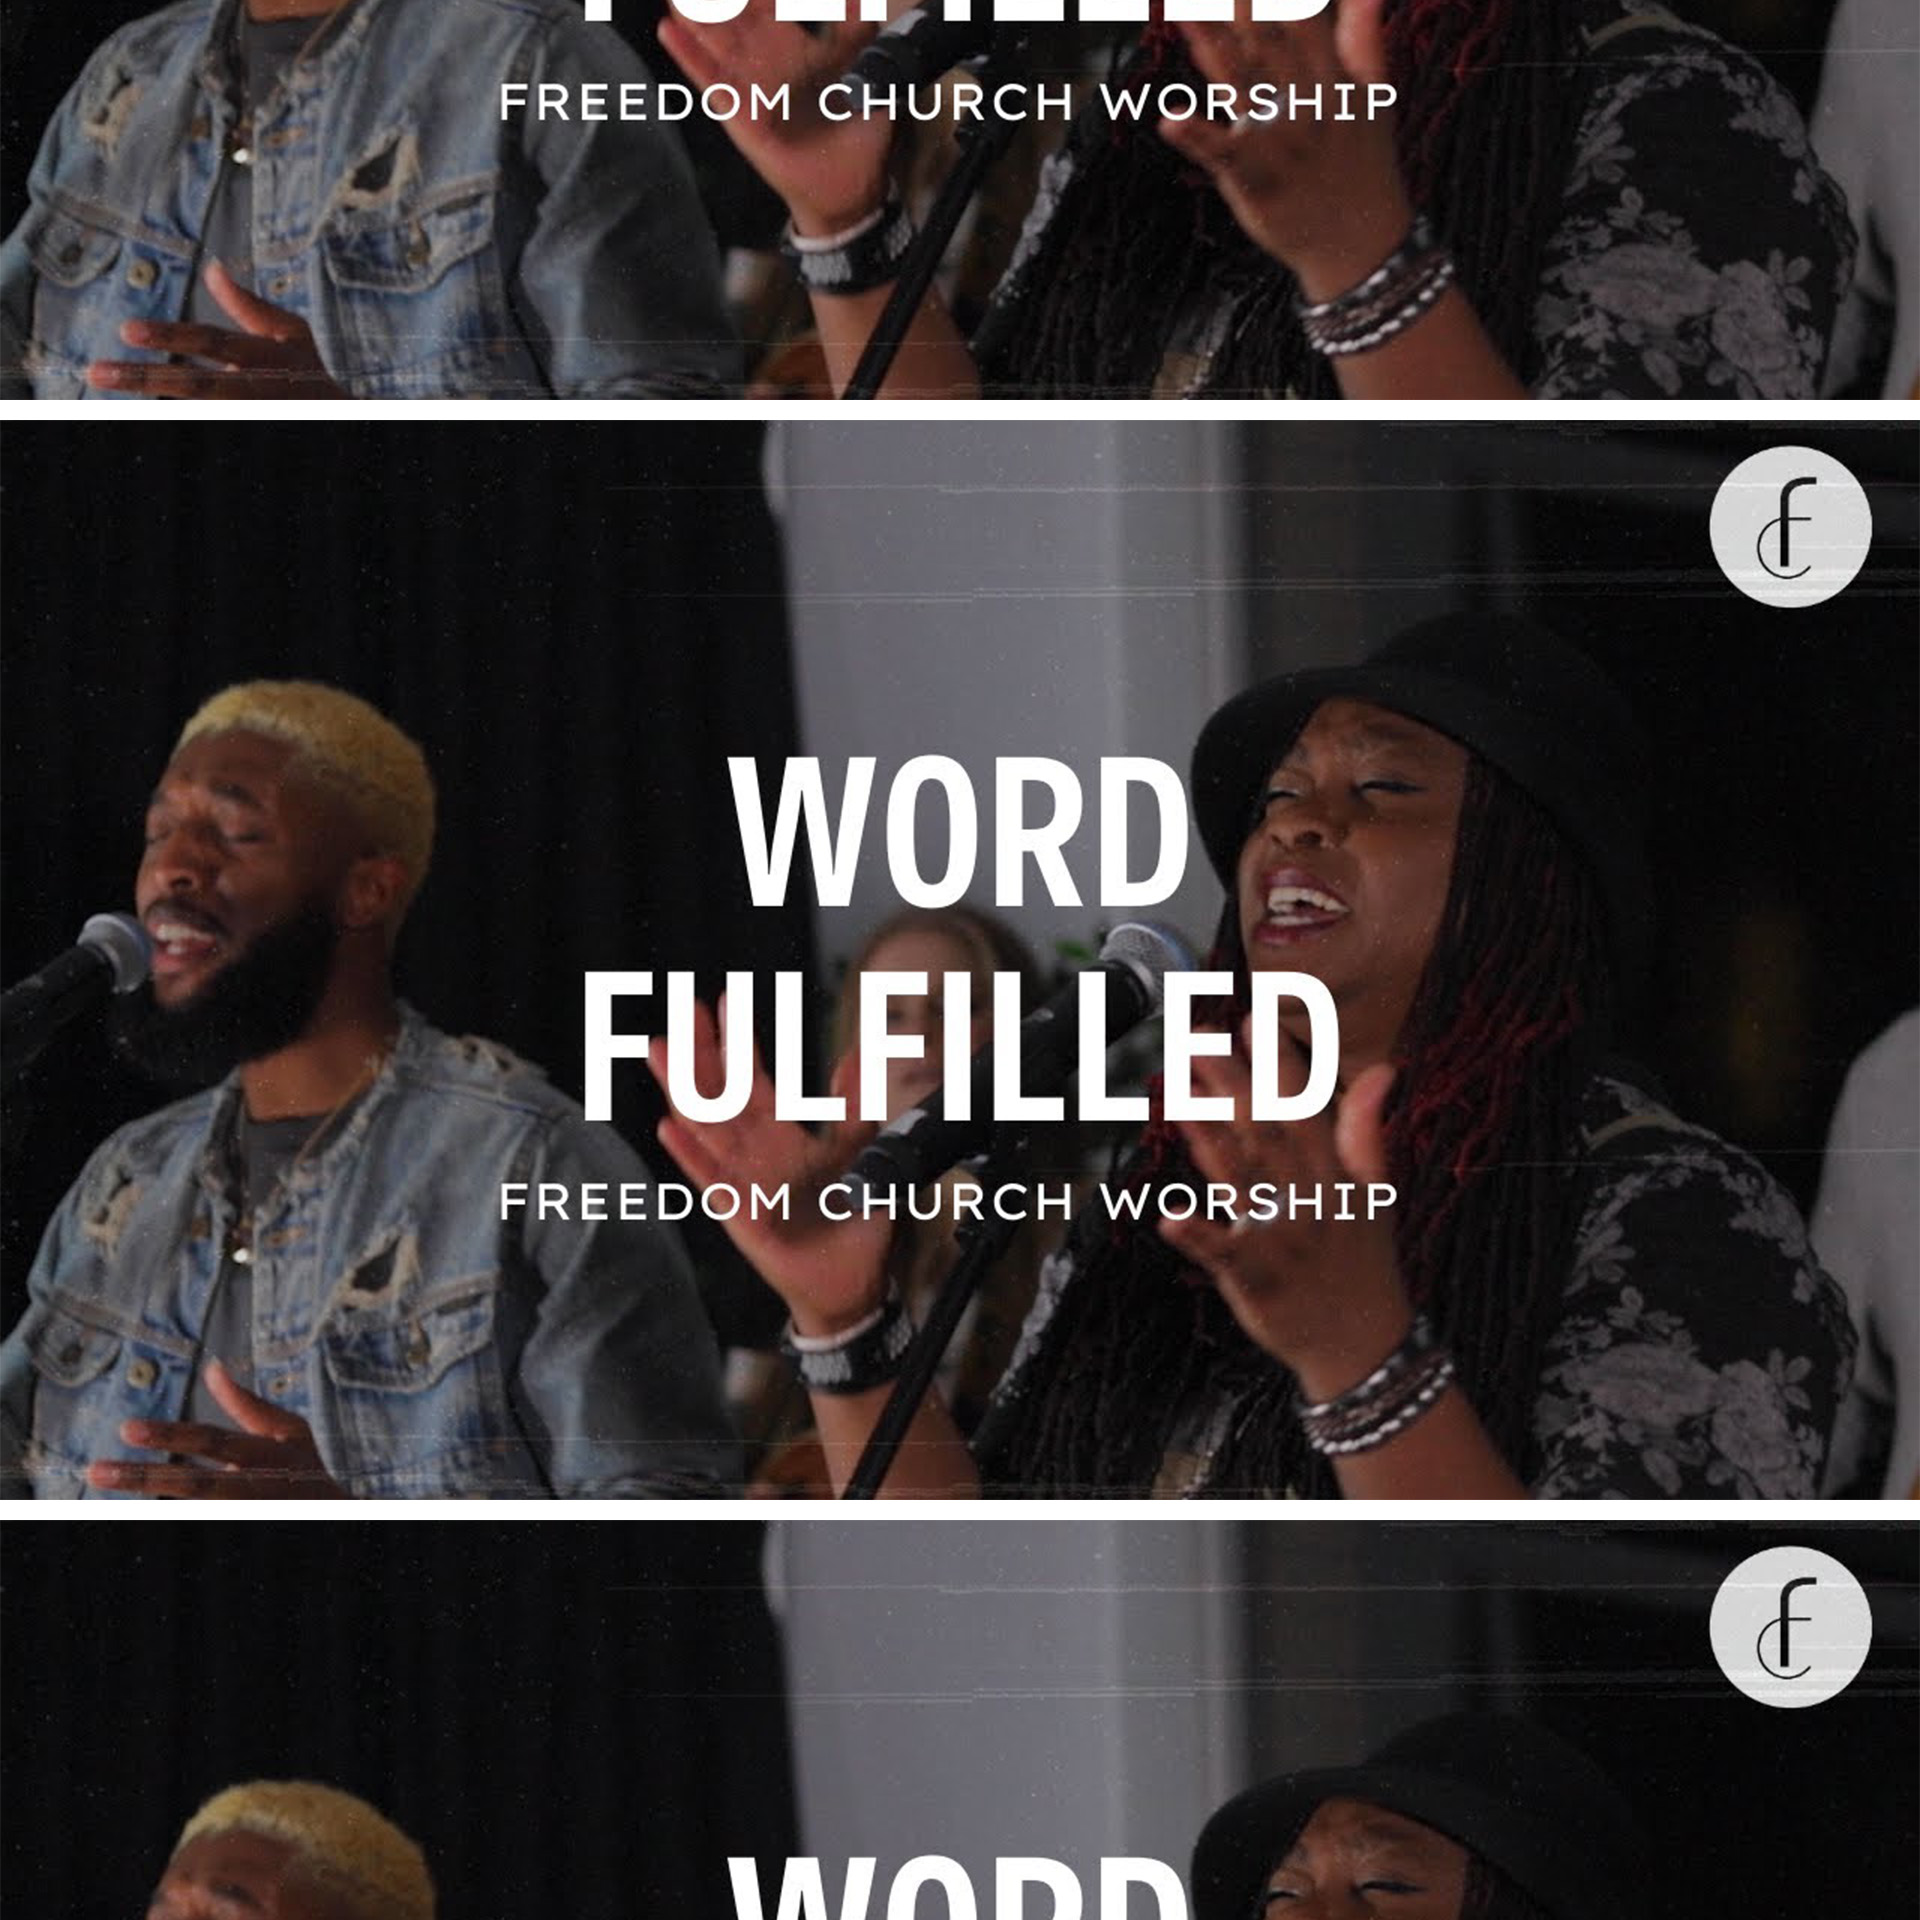 “Word Fulfilled” by Freedom Church Worship